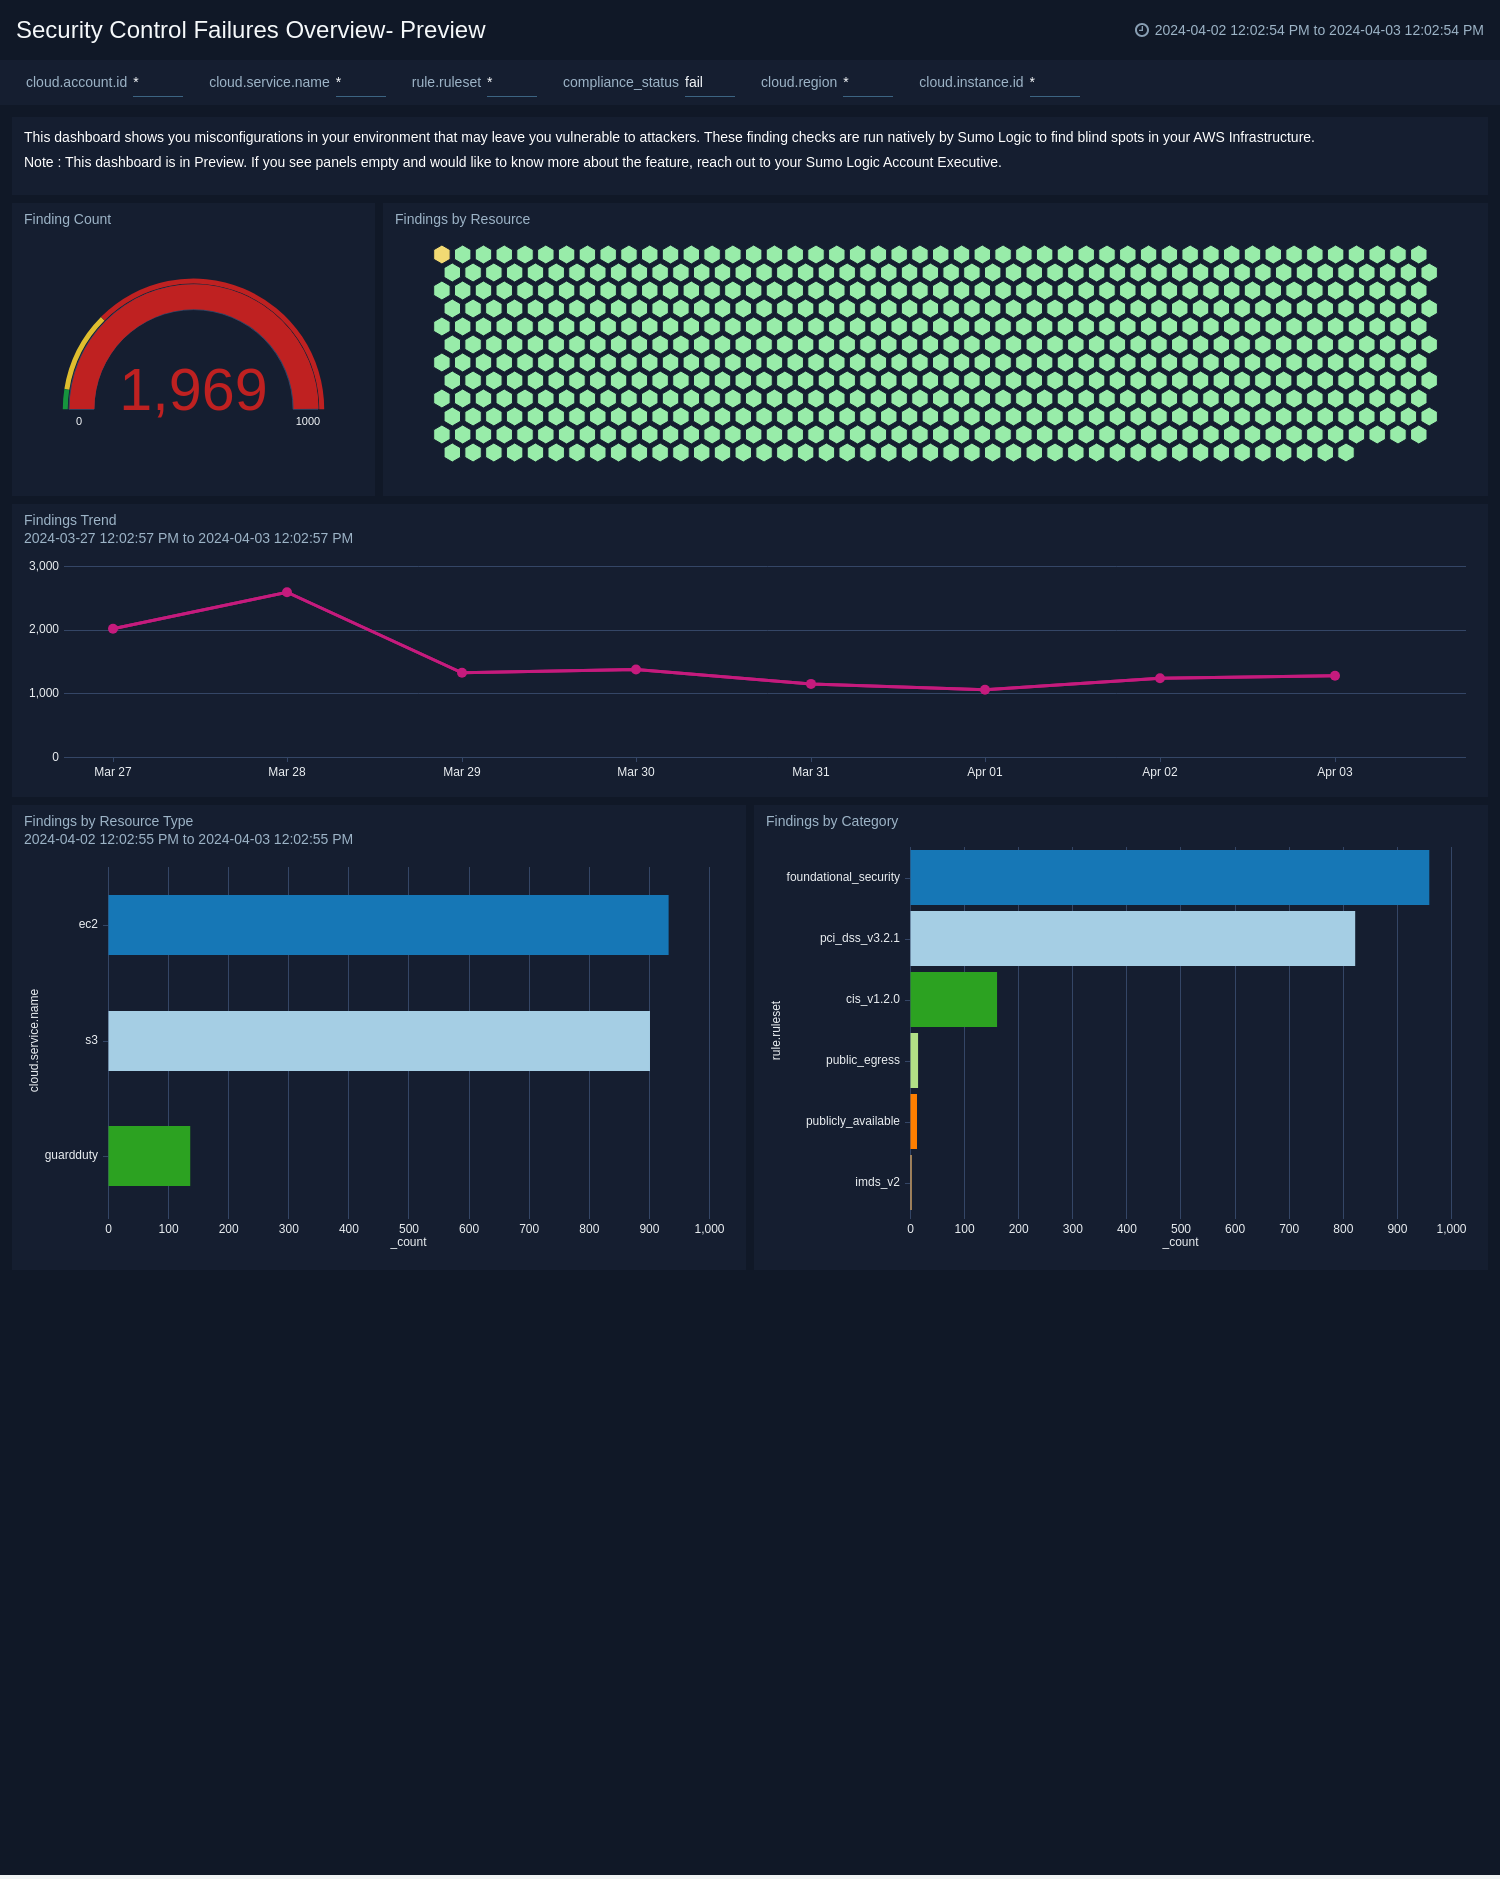 Security Control Failures Overview dashboard